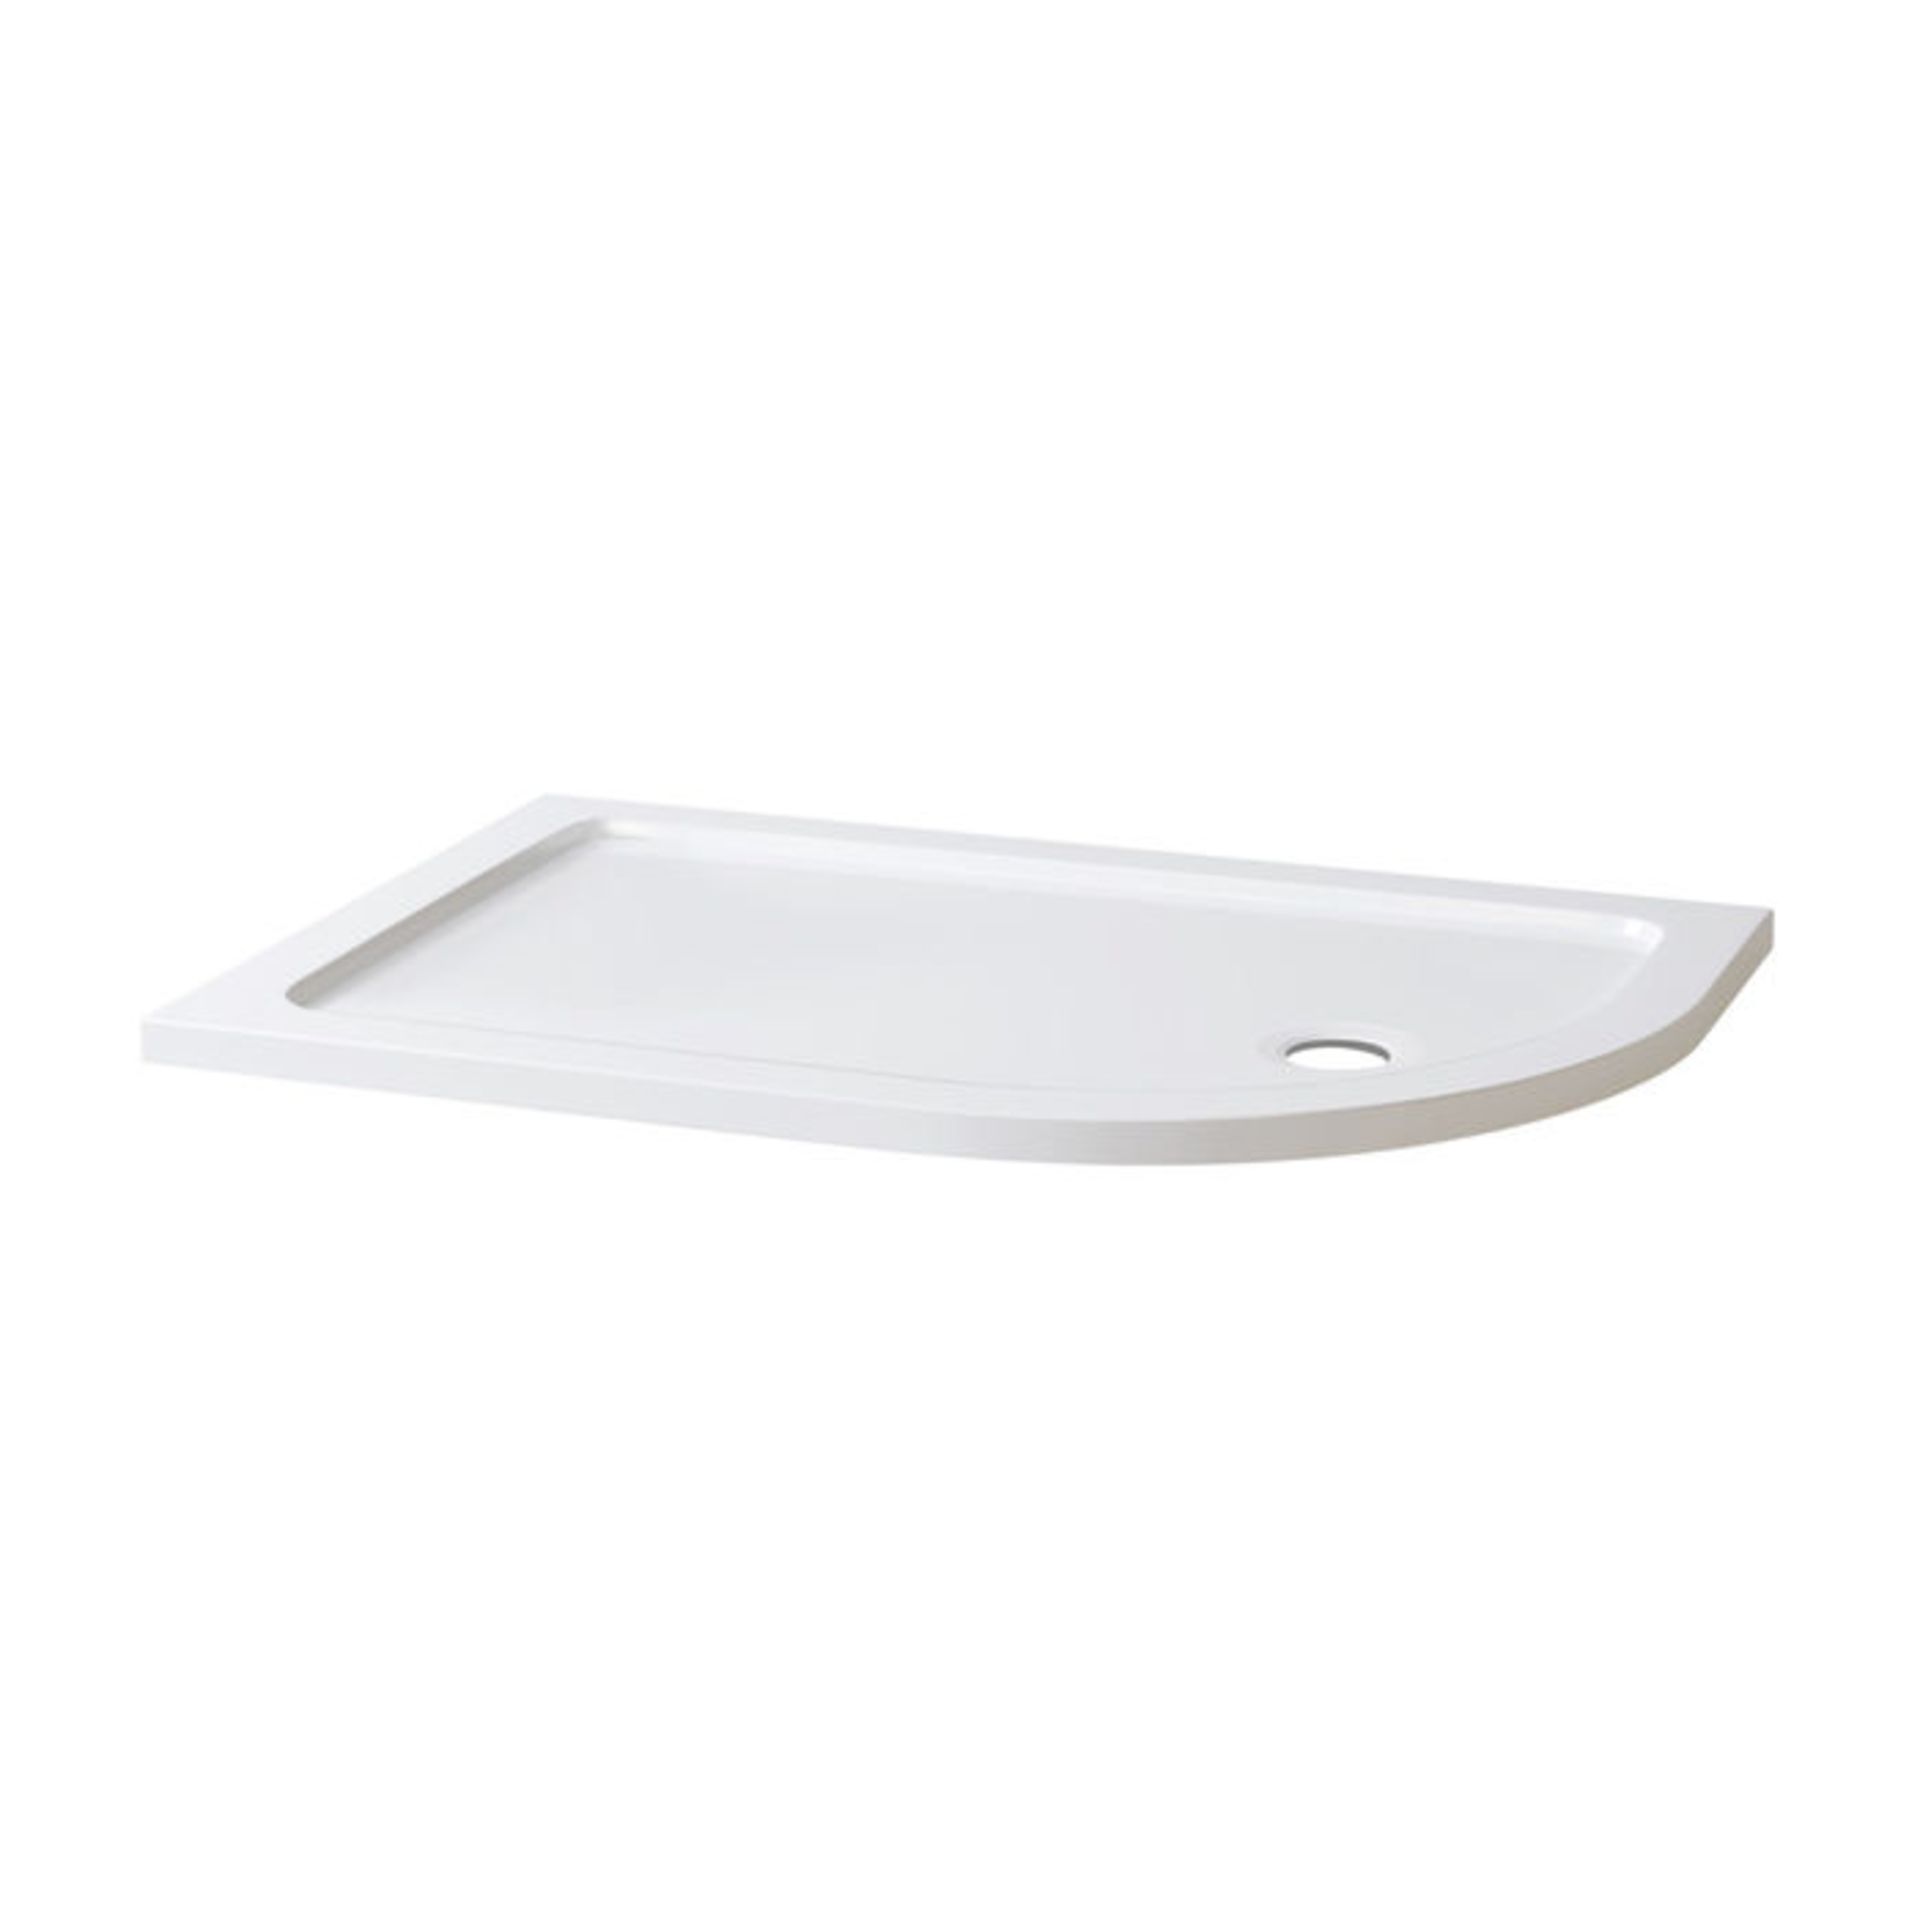 (TY62) 1200x800mm Offset Quadrant Ultra Slim Stone Shower Tray - Right. Low profile ultra slim - Image 2 of 2